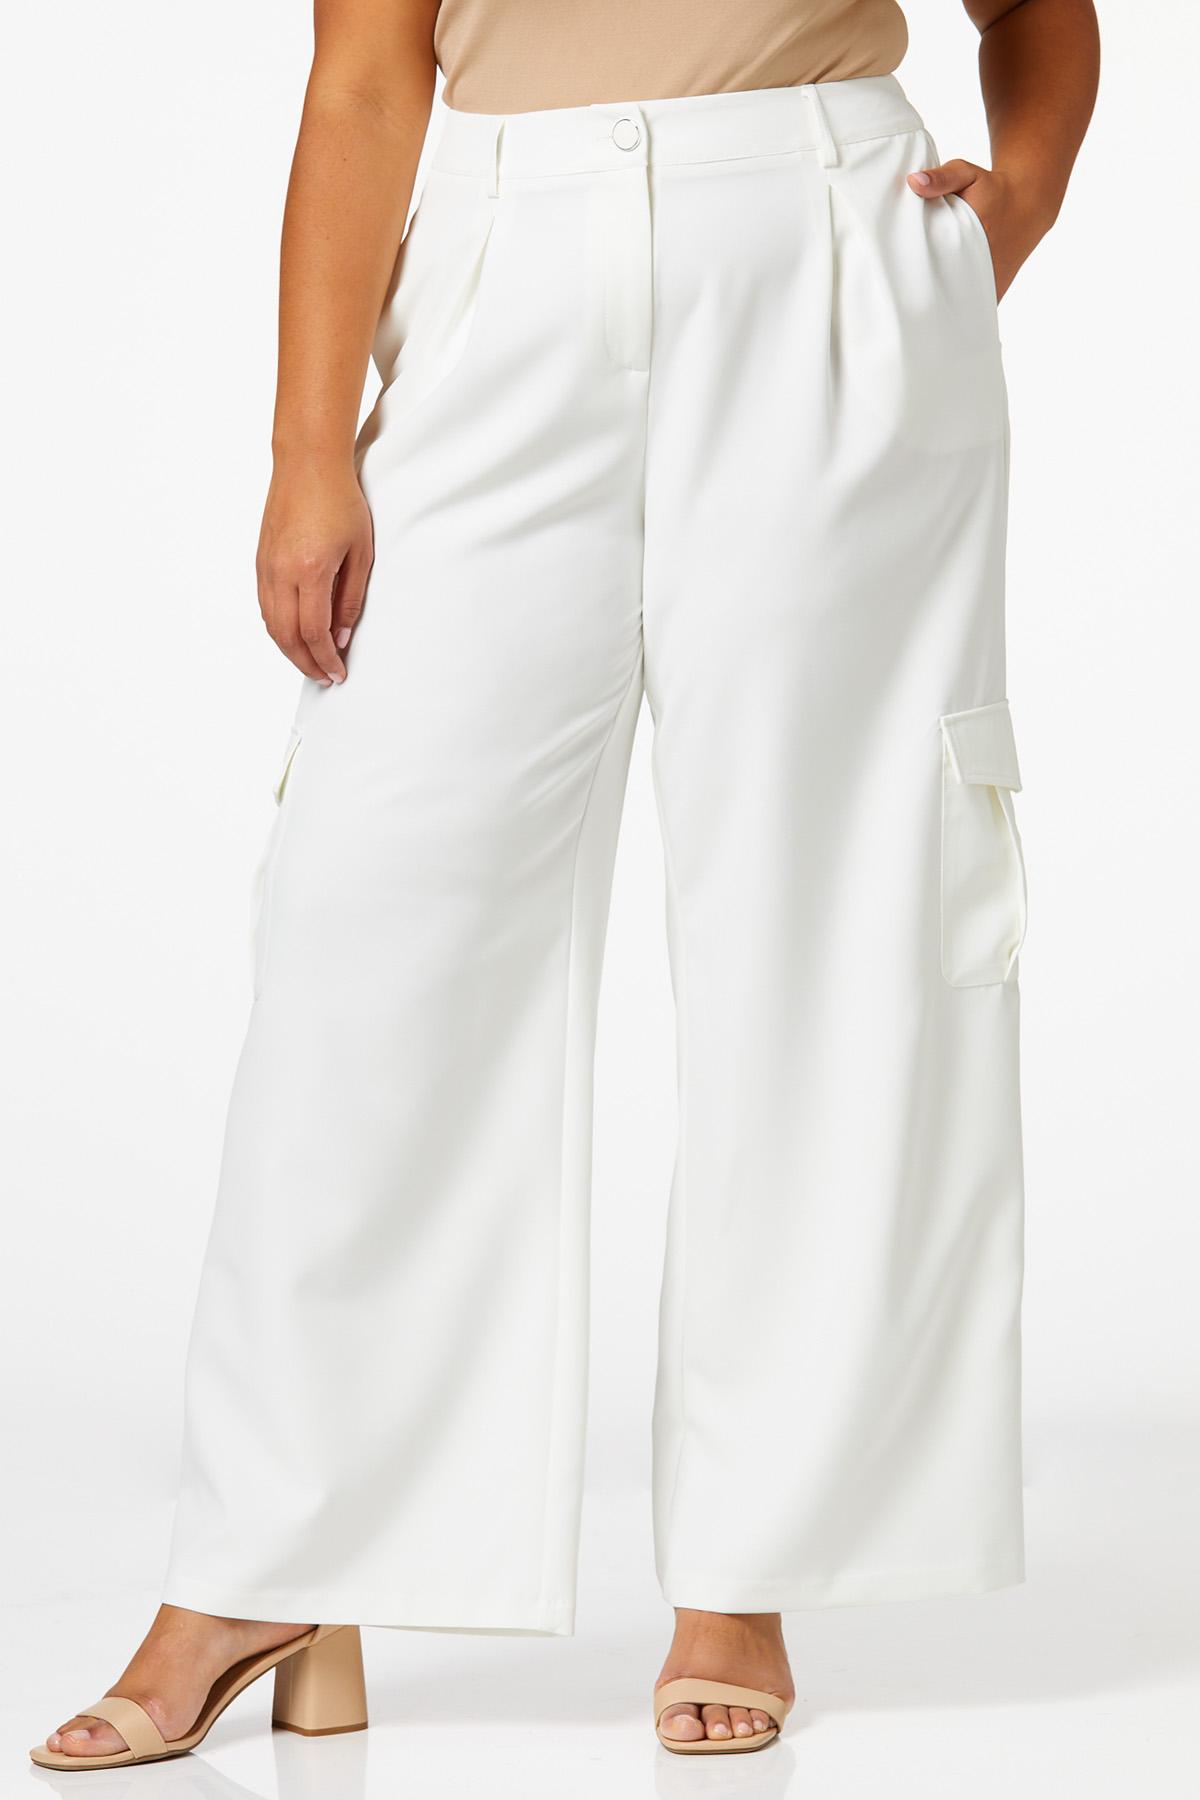 Cato Fashions  Cato Plus Size Ivory Cargo Trousers